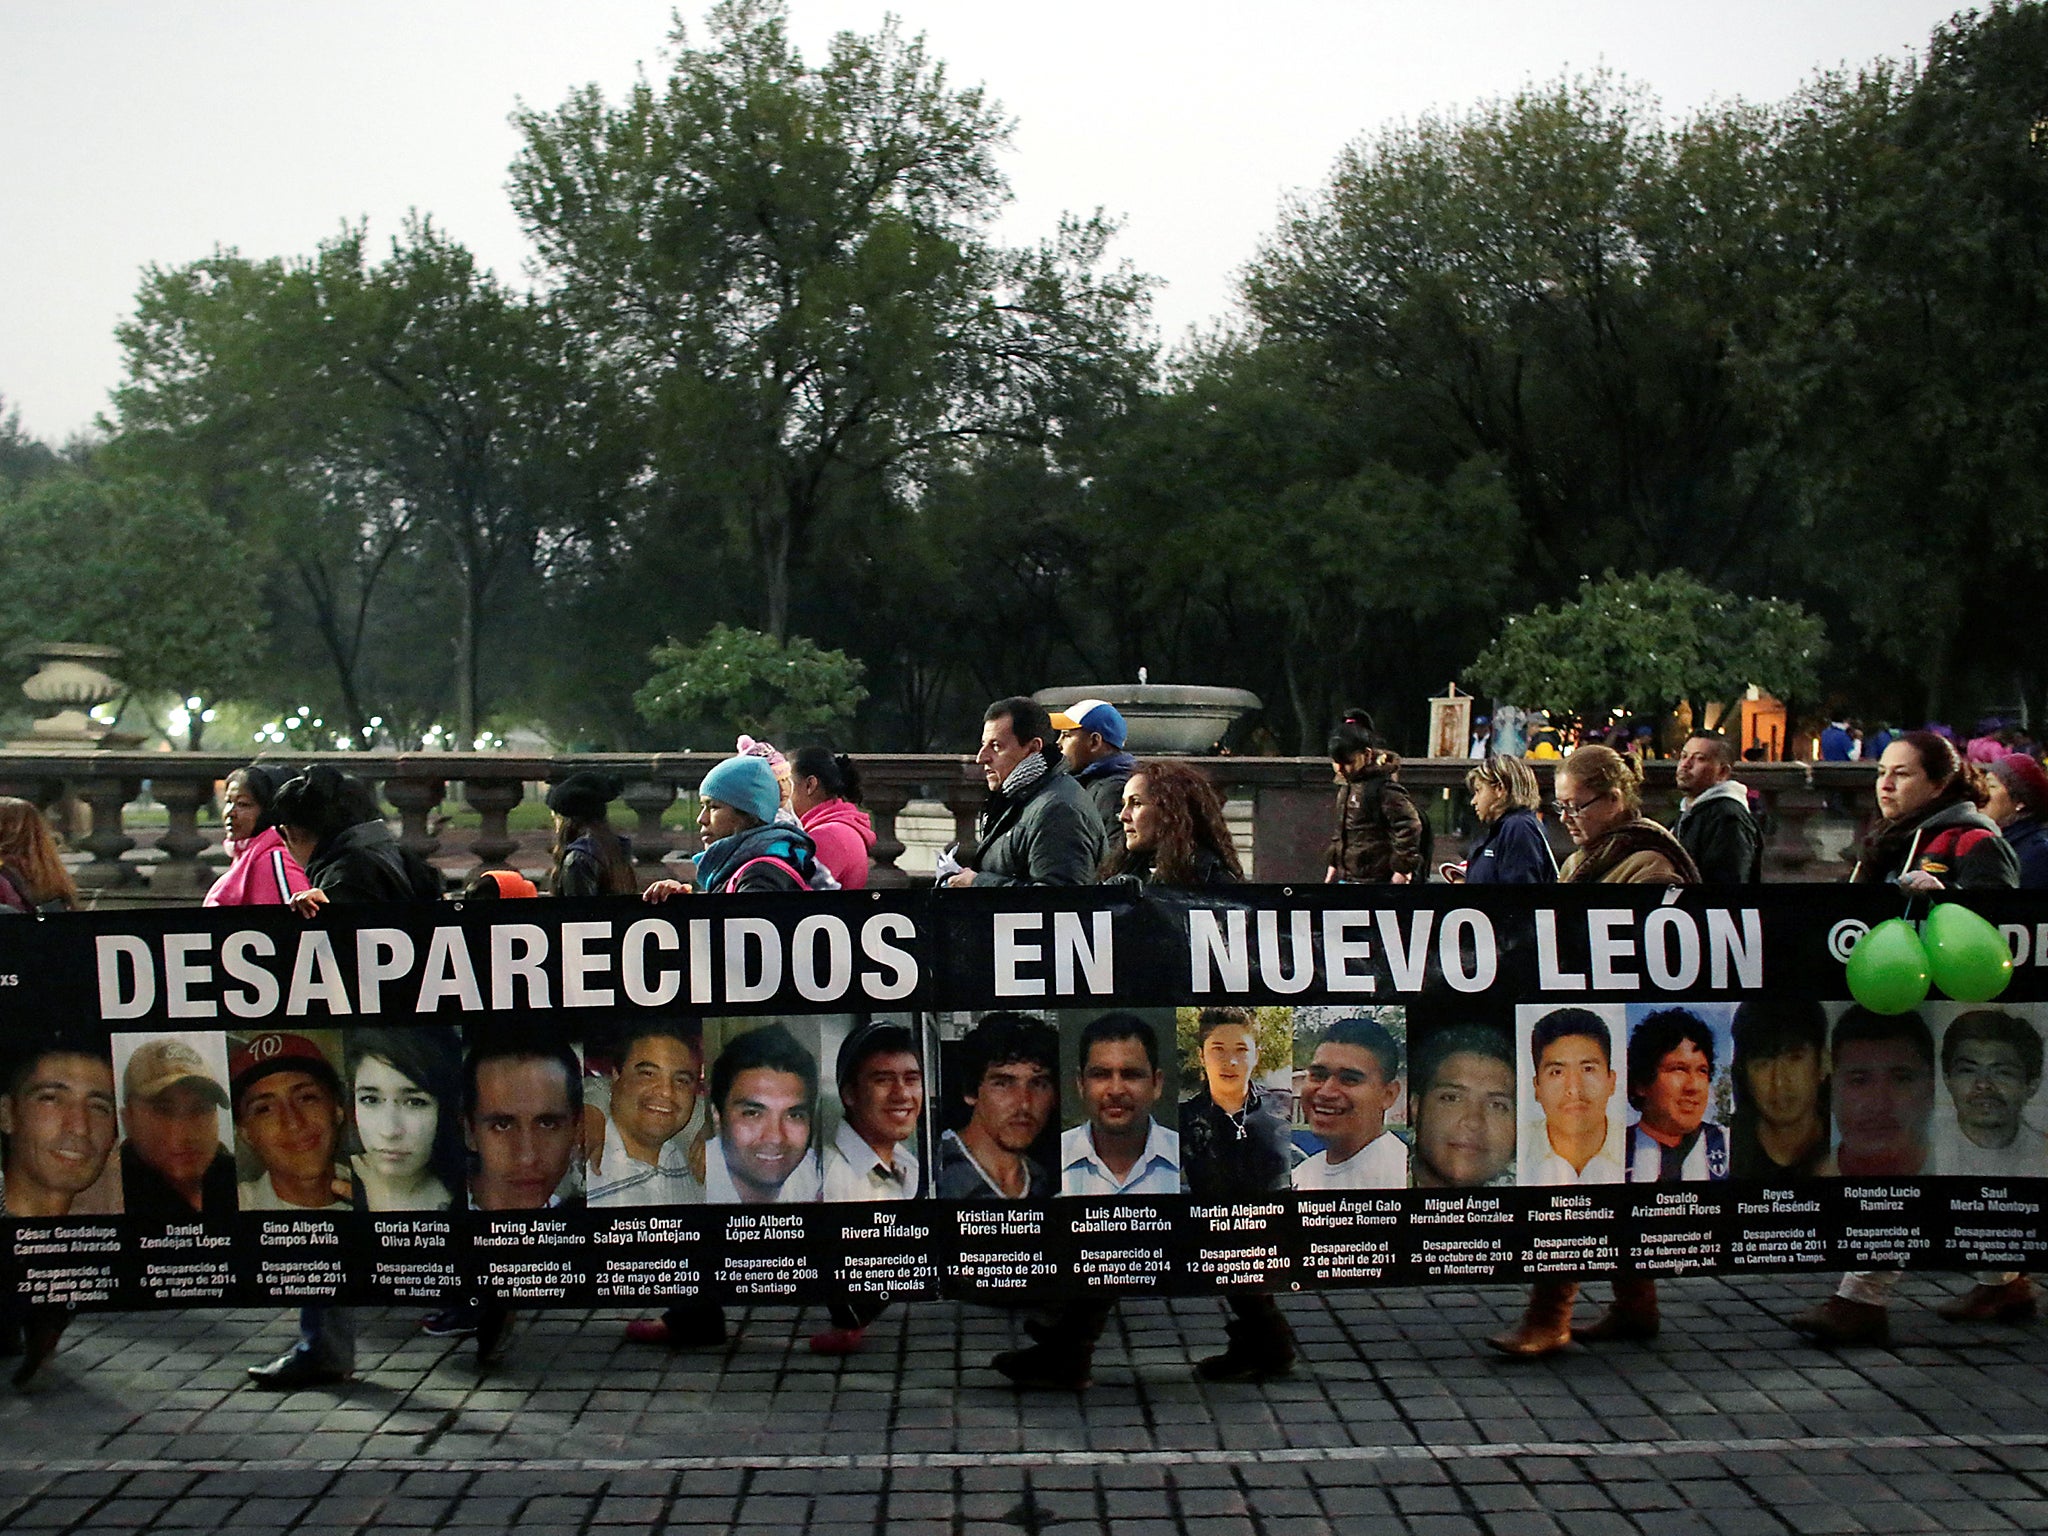 Demonstrators hold a banner with images of their relatives, who they say went missing or were killed, during a demonstration demanding justice for the victims of violence, in Monterrey, Nuevo Leon state, Mexico